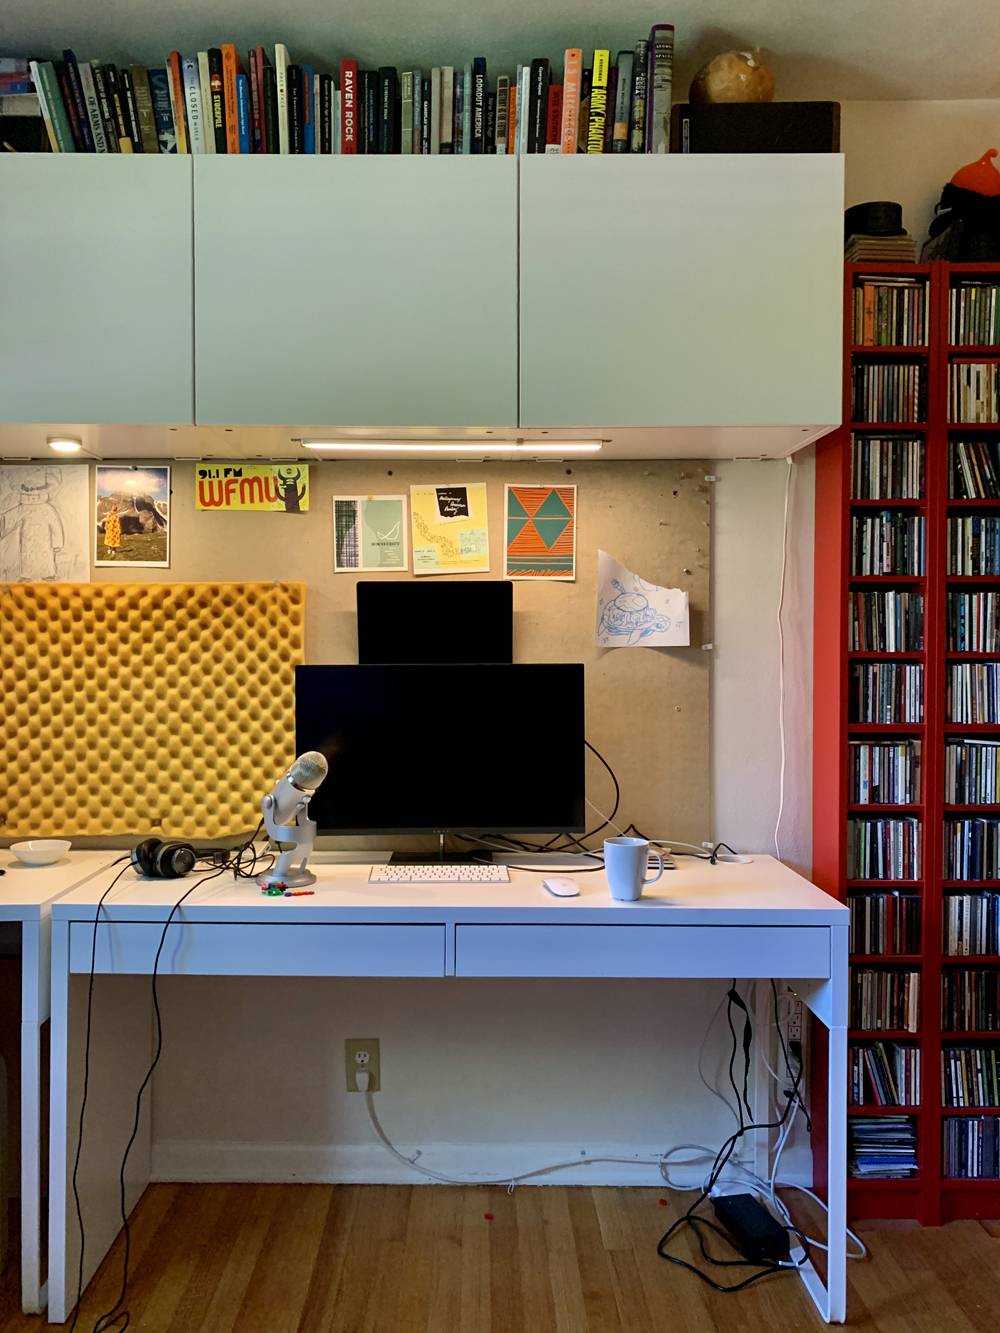 View of a desk in a home office. On the white desk is a microphone, a computer monitor, keyboard, and mouse. There are books on a shelf above the desk, and another bookshelf with books to the right of the desk. On the wall behind the desk is a pin board, with postcards and noise-buffering foam. Photo by Kevin Hamilton. 